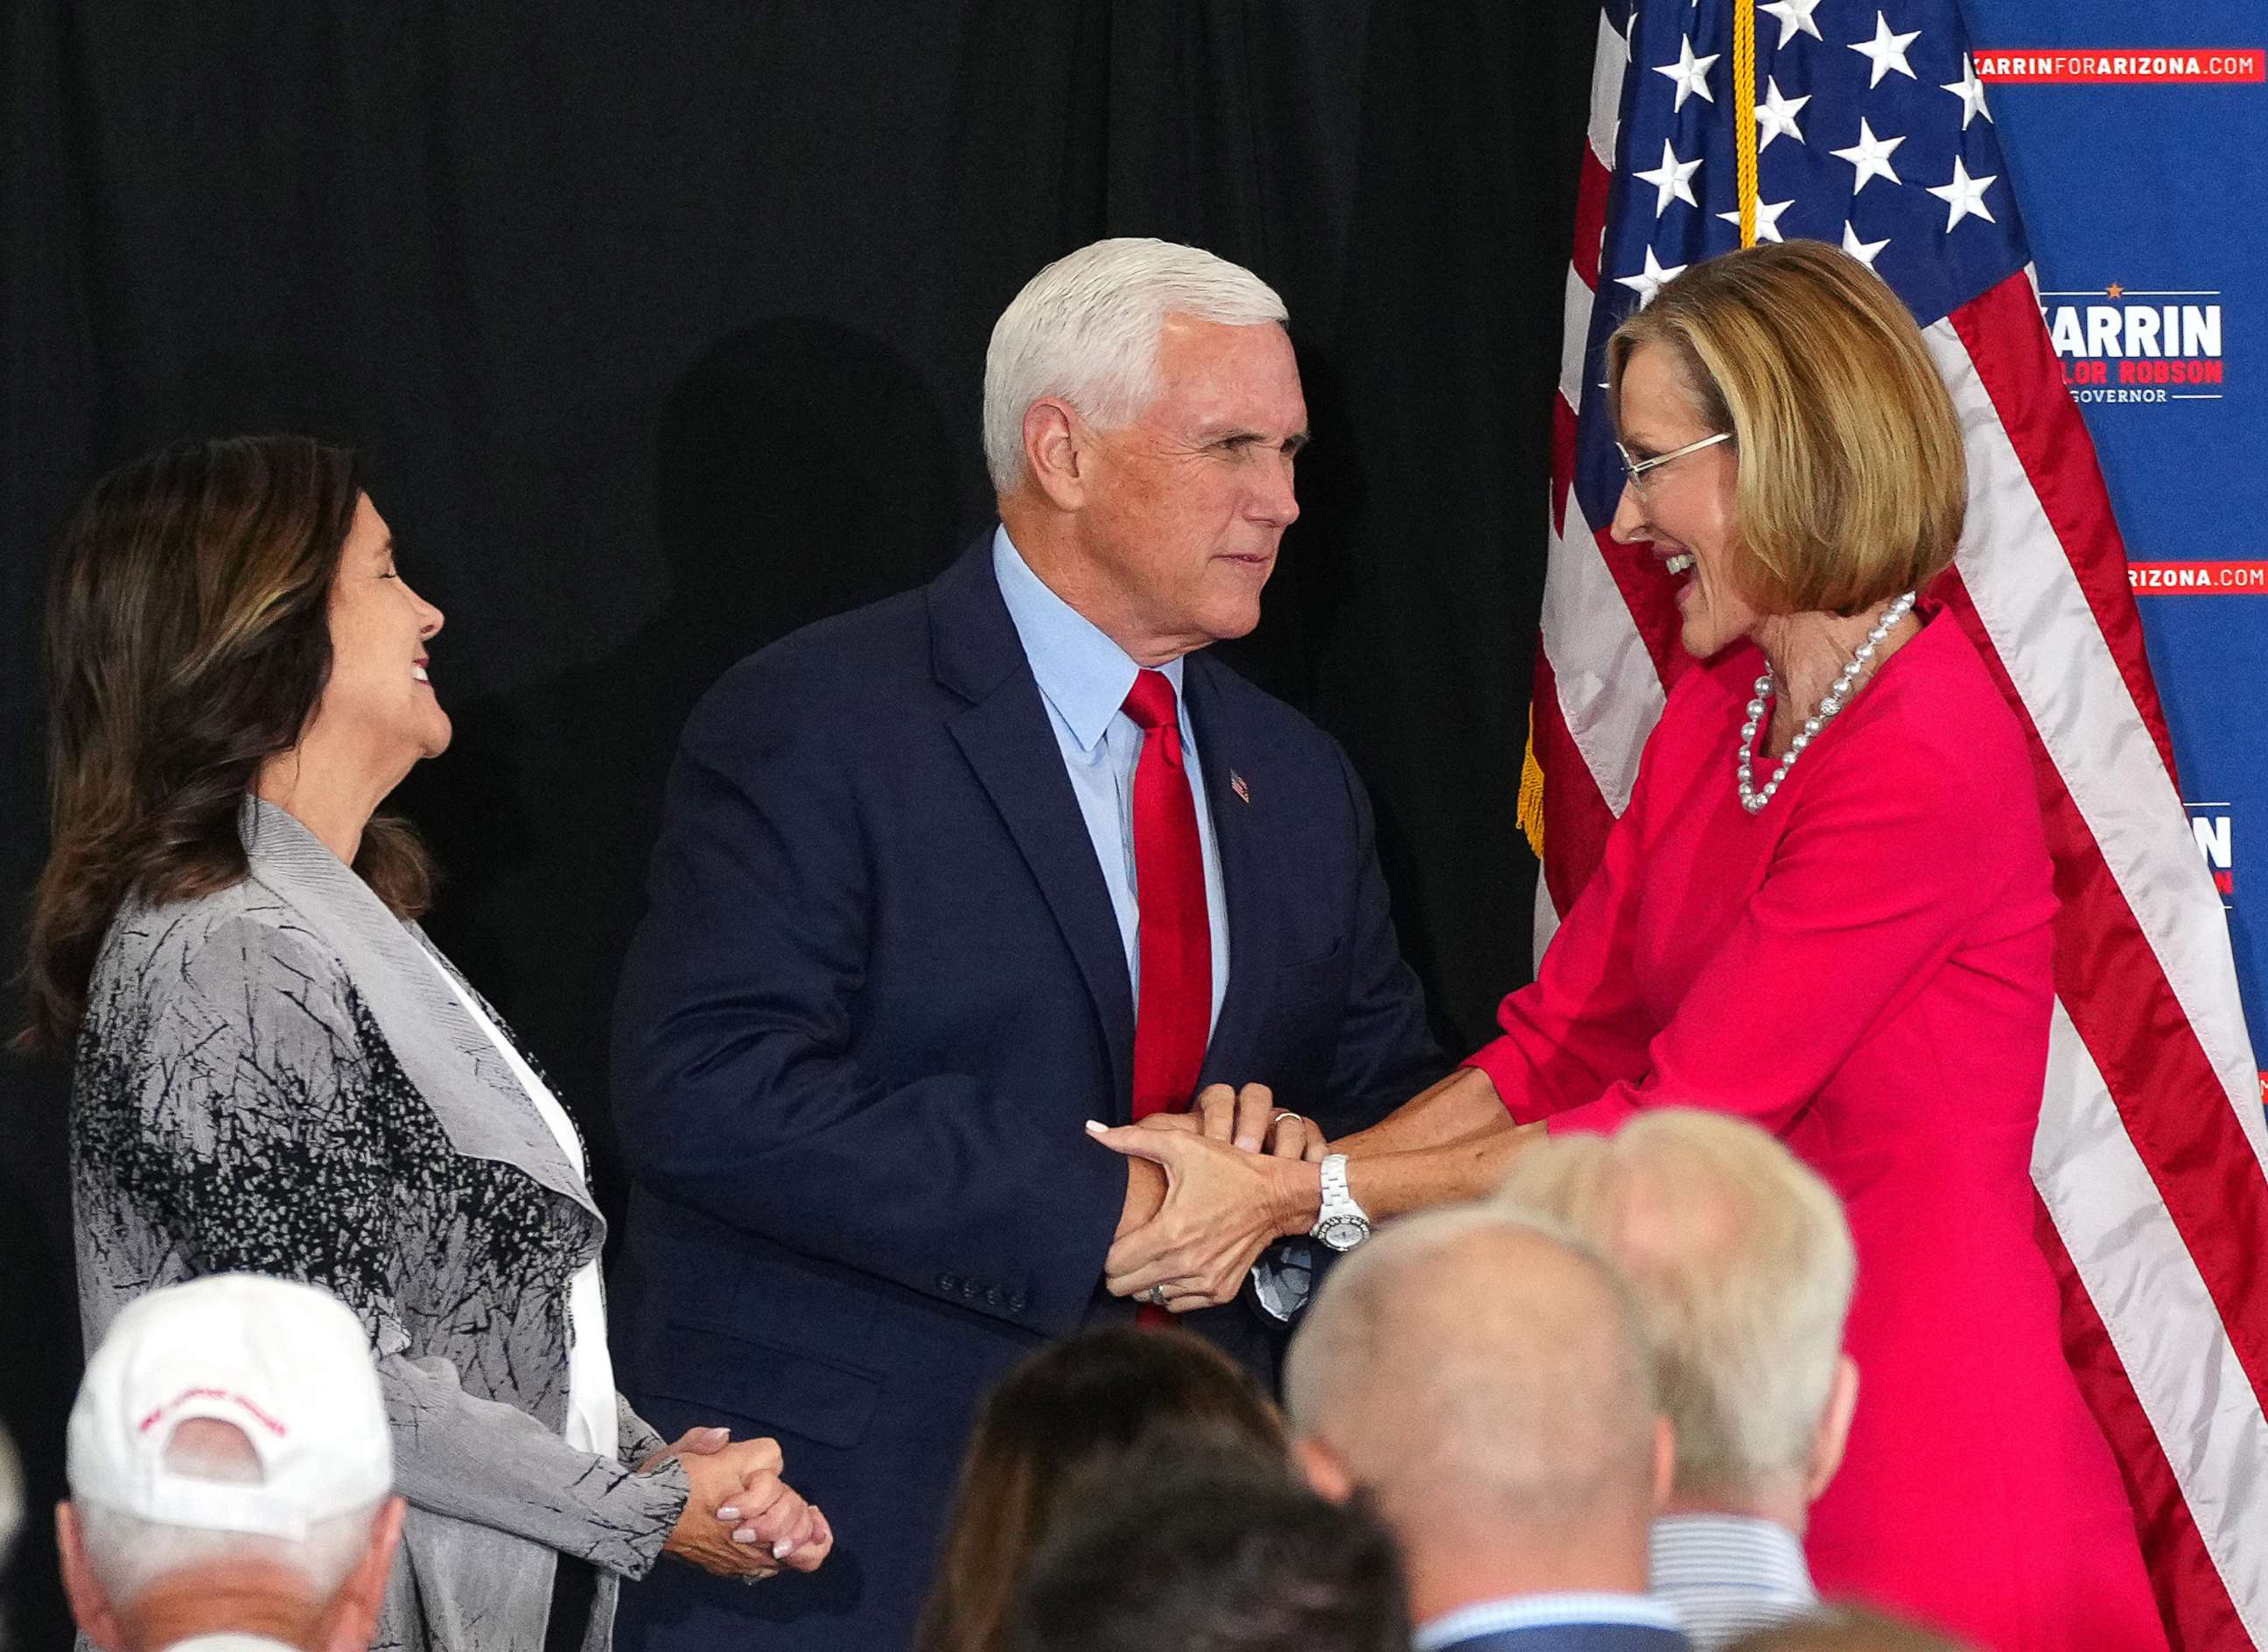 PHOTO: Former Vice President Mike Pence and his wife Karen Pence shake hands with gubernatorial candidate Karrin Taylor Robson during her campaign event in Peoria, Ariz, July 22, 2022.